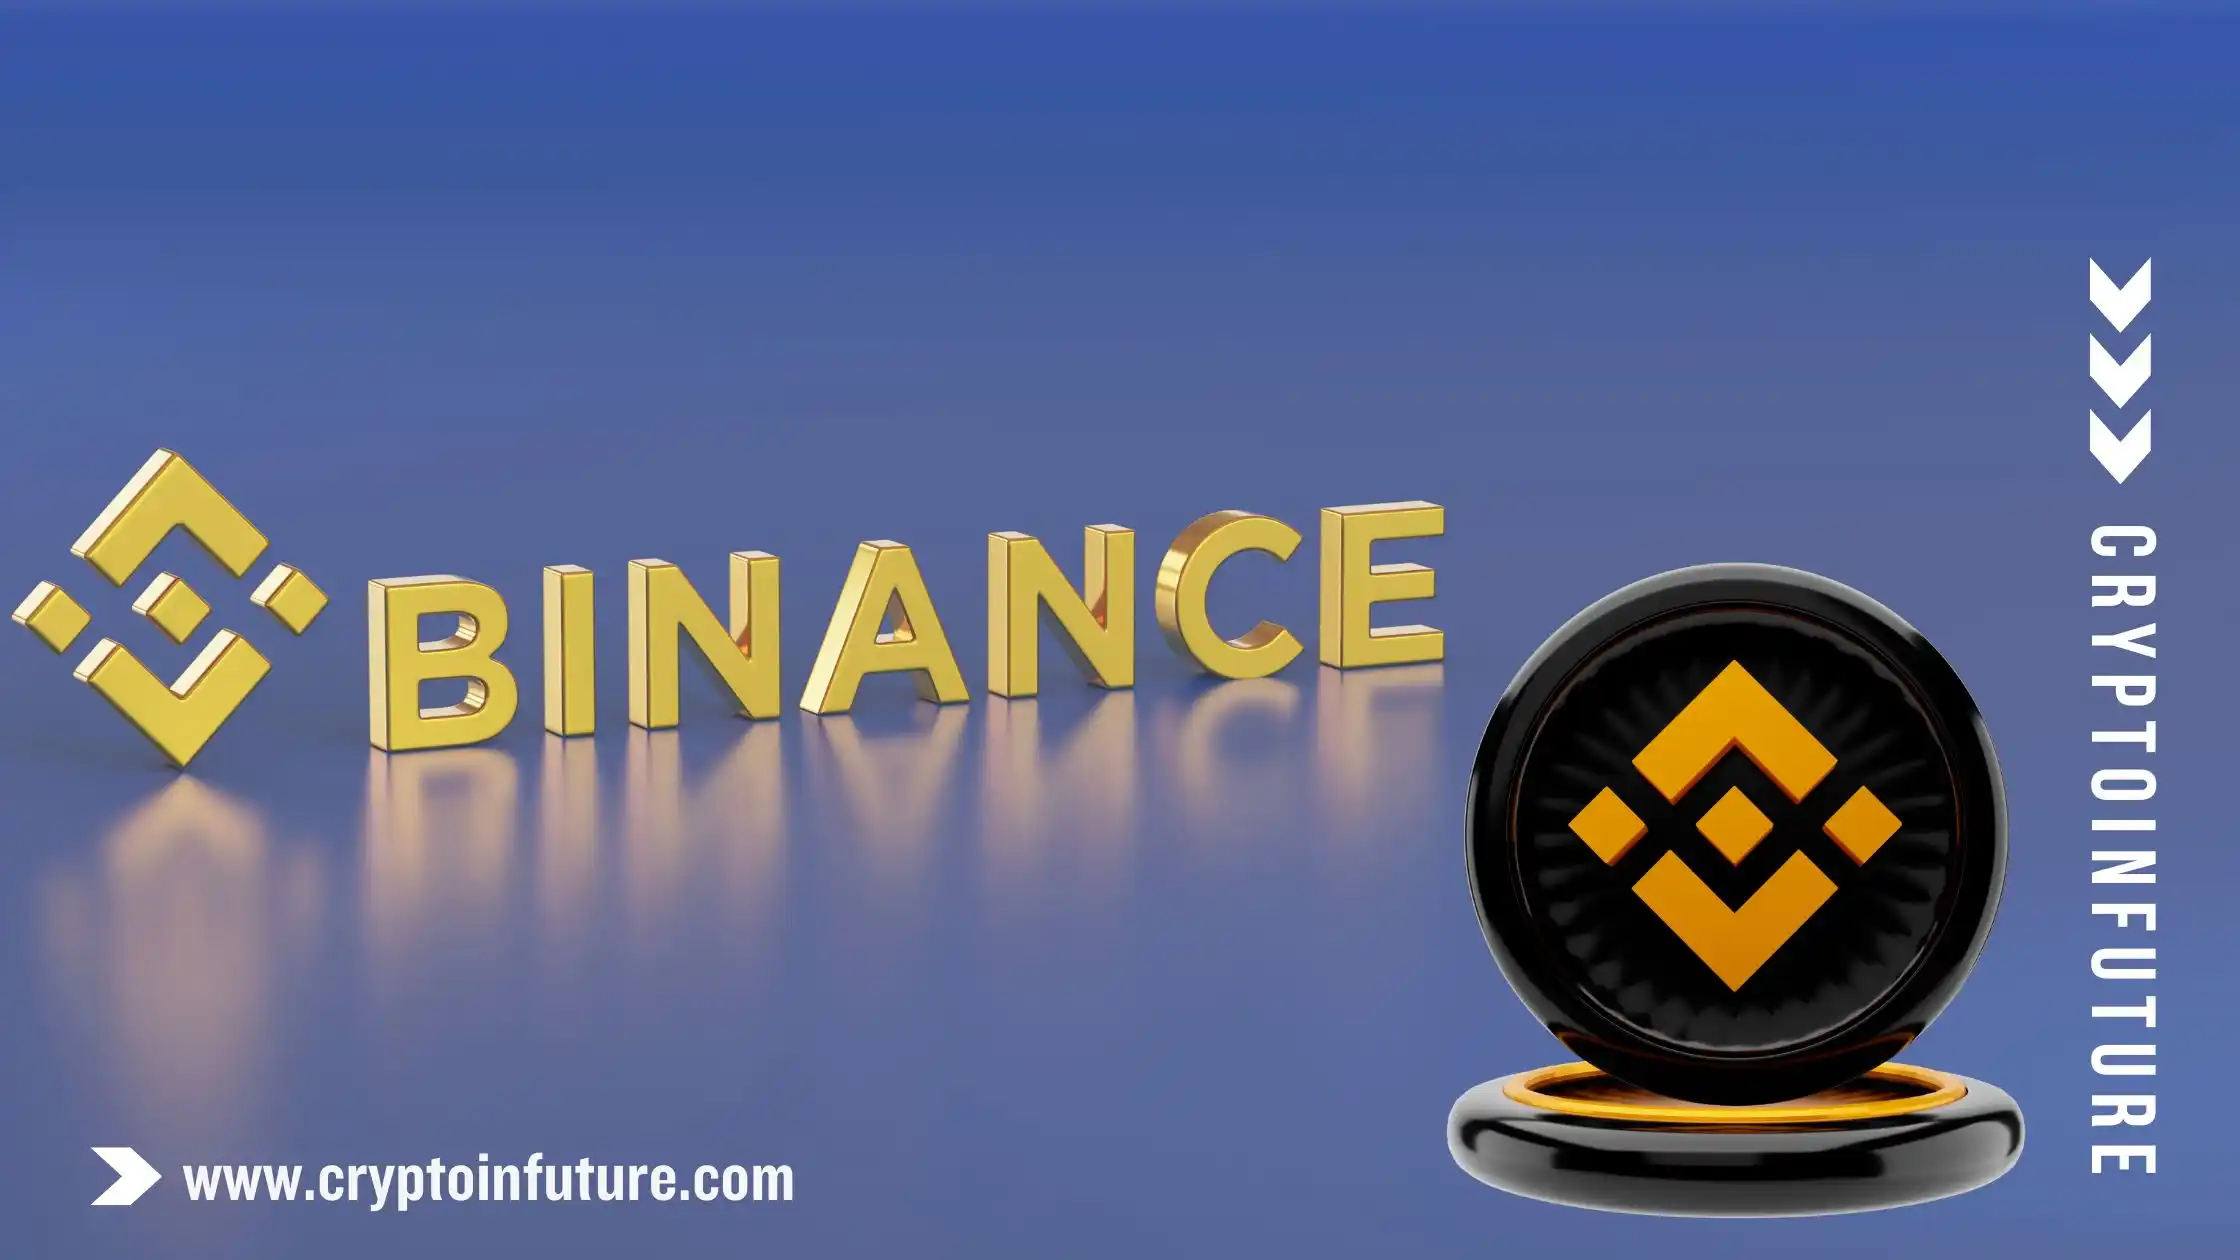 About Binance coin